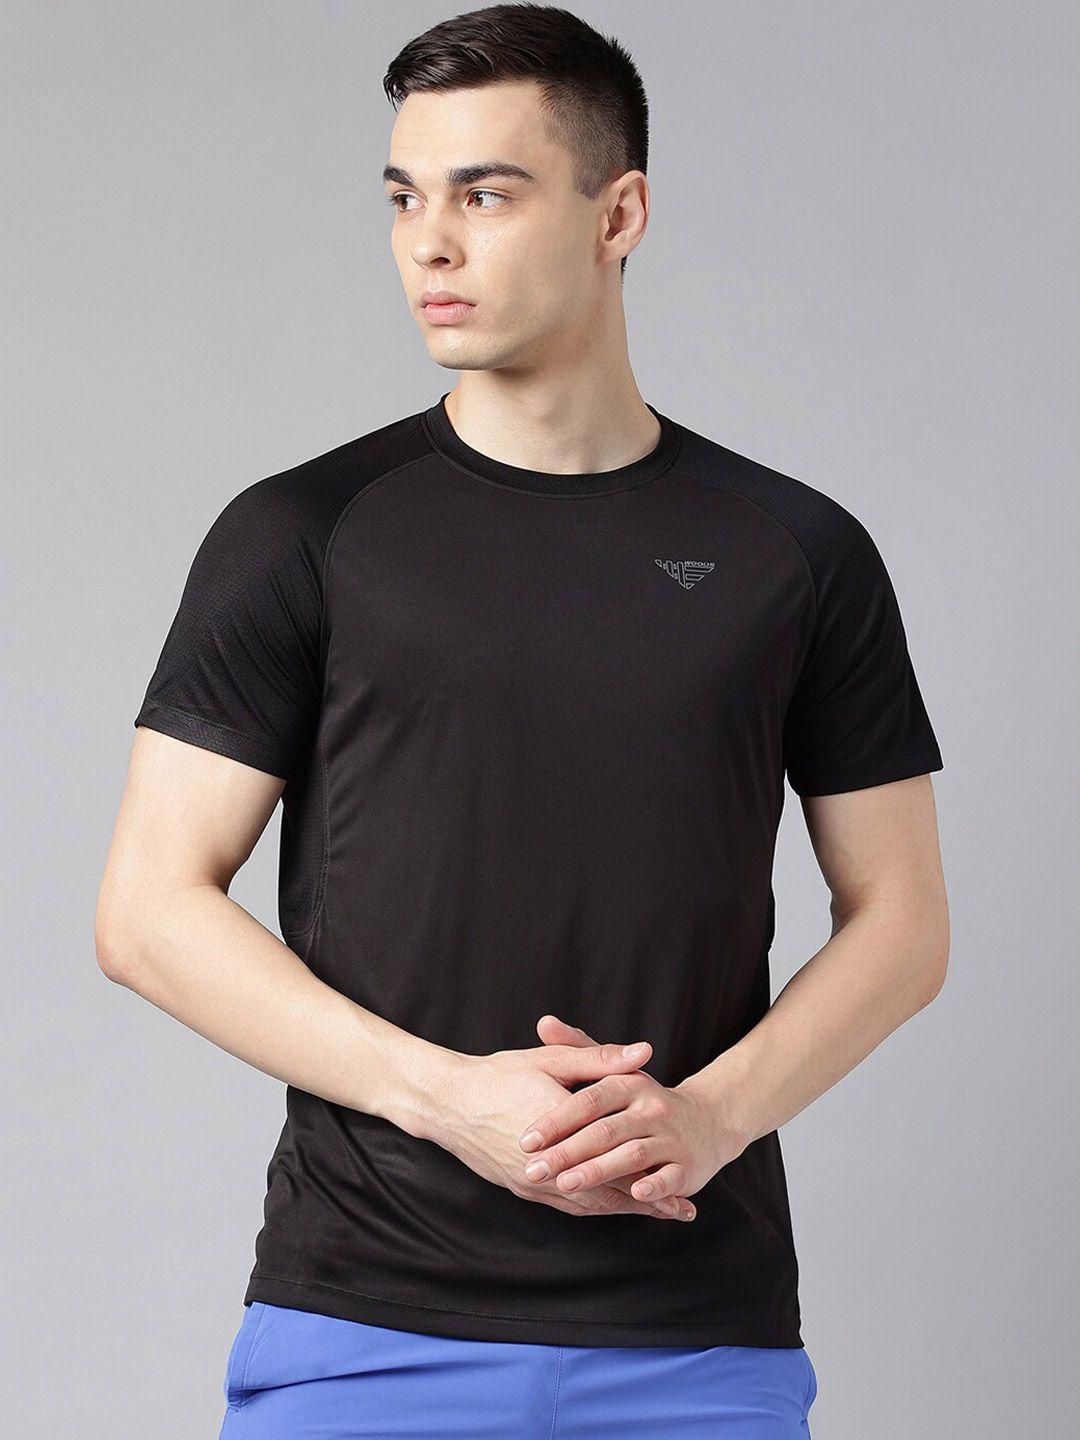 woods round neck antimicrobial training or gym t-shirt